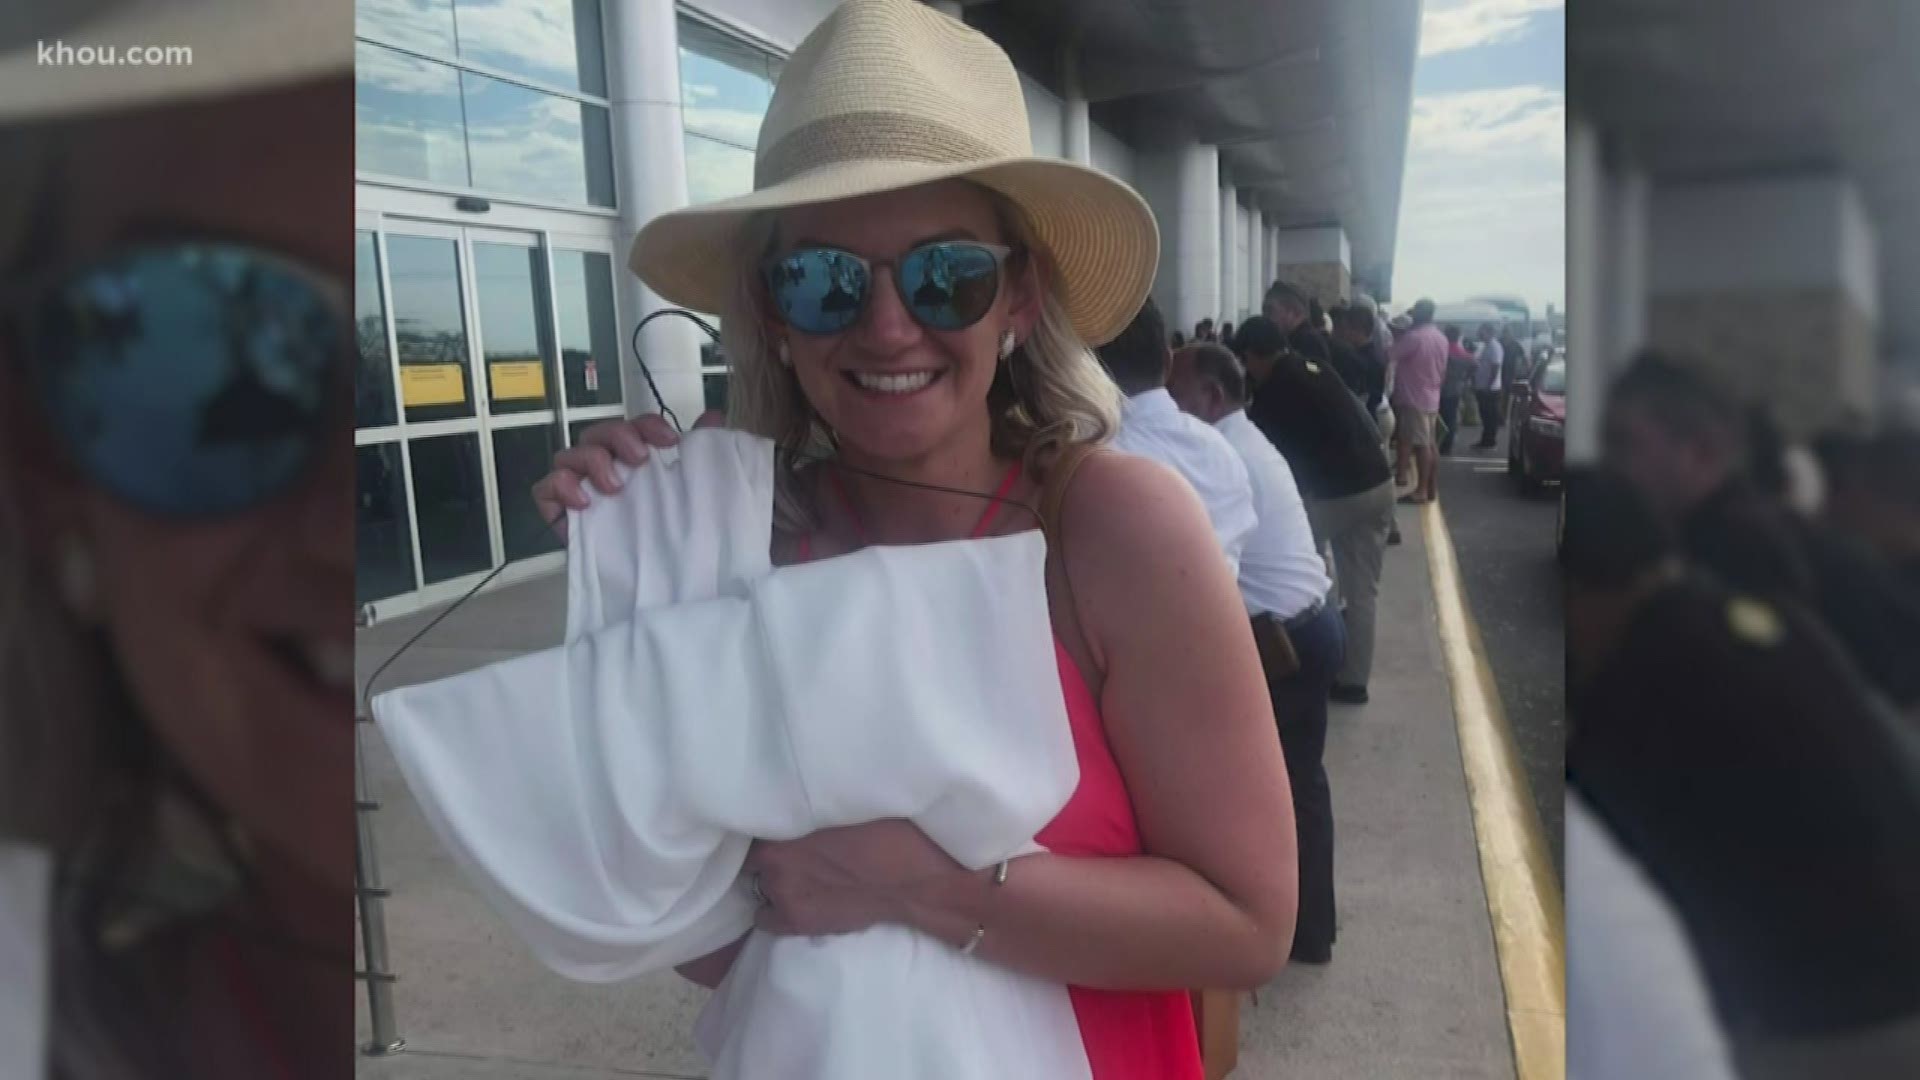 A Cypress woman forgot to pack her bridesmaid dress for a destination wedding in Costa Rica. But one tweet led to a special delivery.